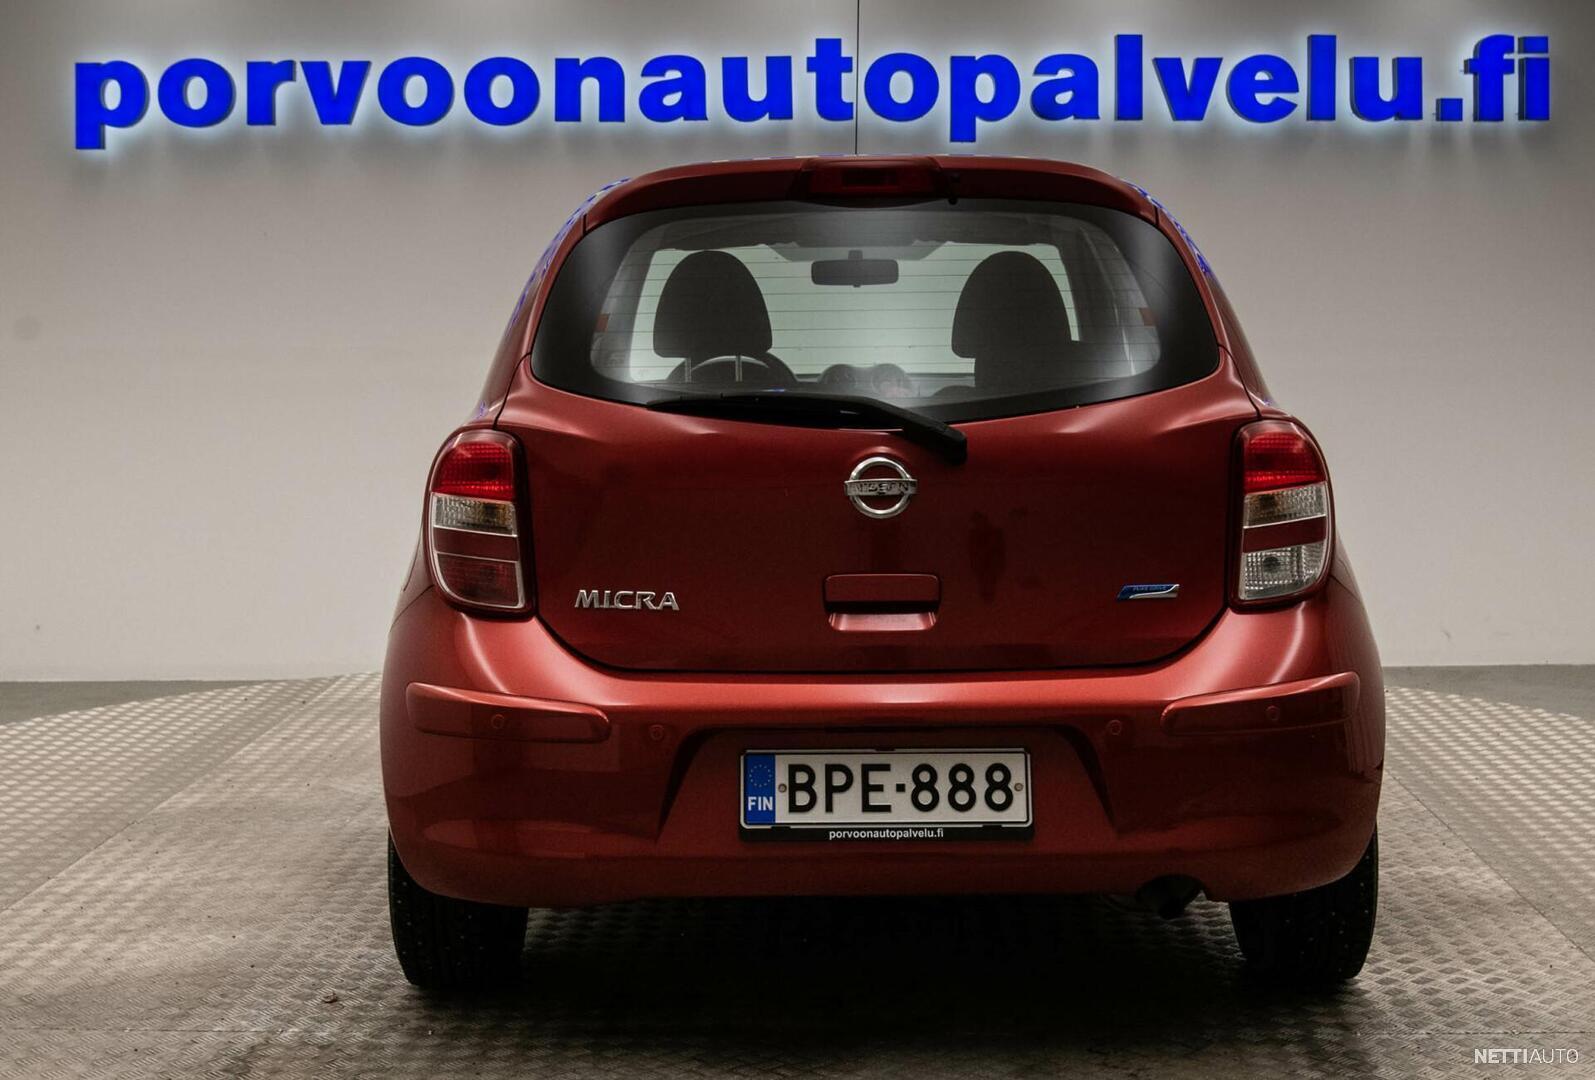 Nissan Micra 5d Acenta 1,2 80 hp CVT w/ Parking Pack, Look Pack & Connect  Hatchback 2011 - Used vehicle - Nettiauto